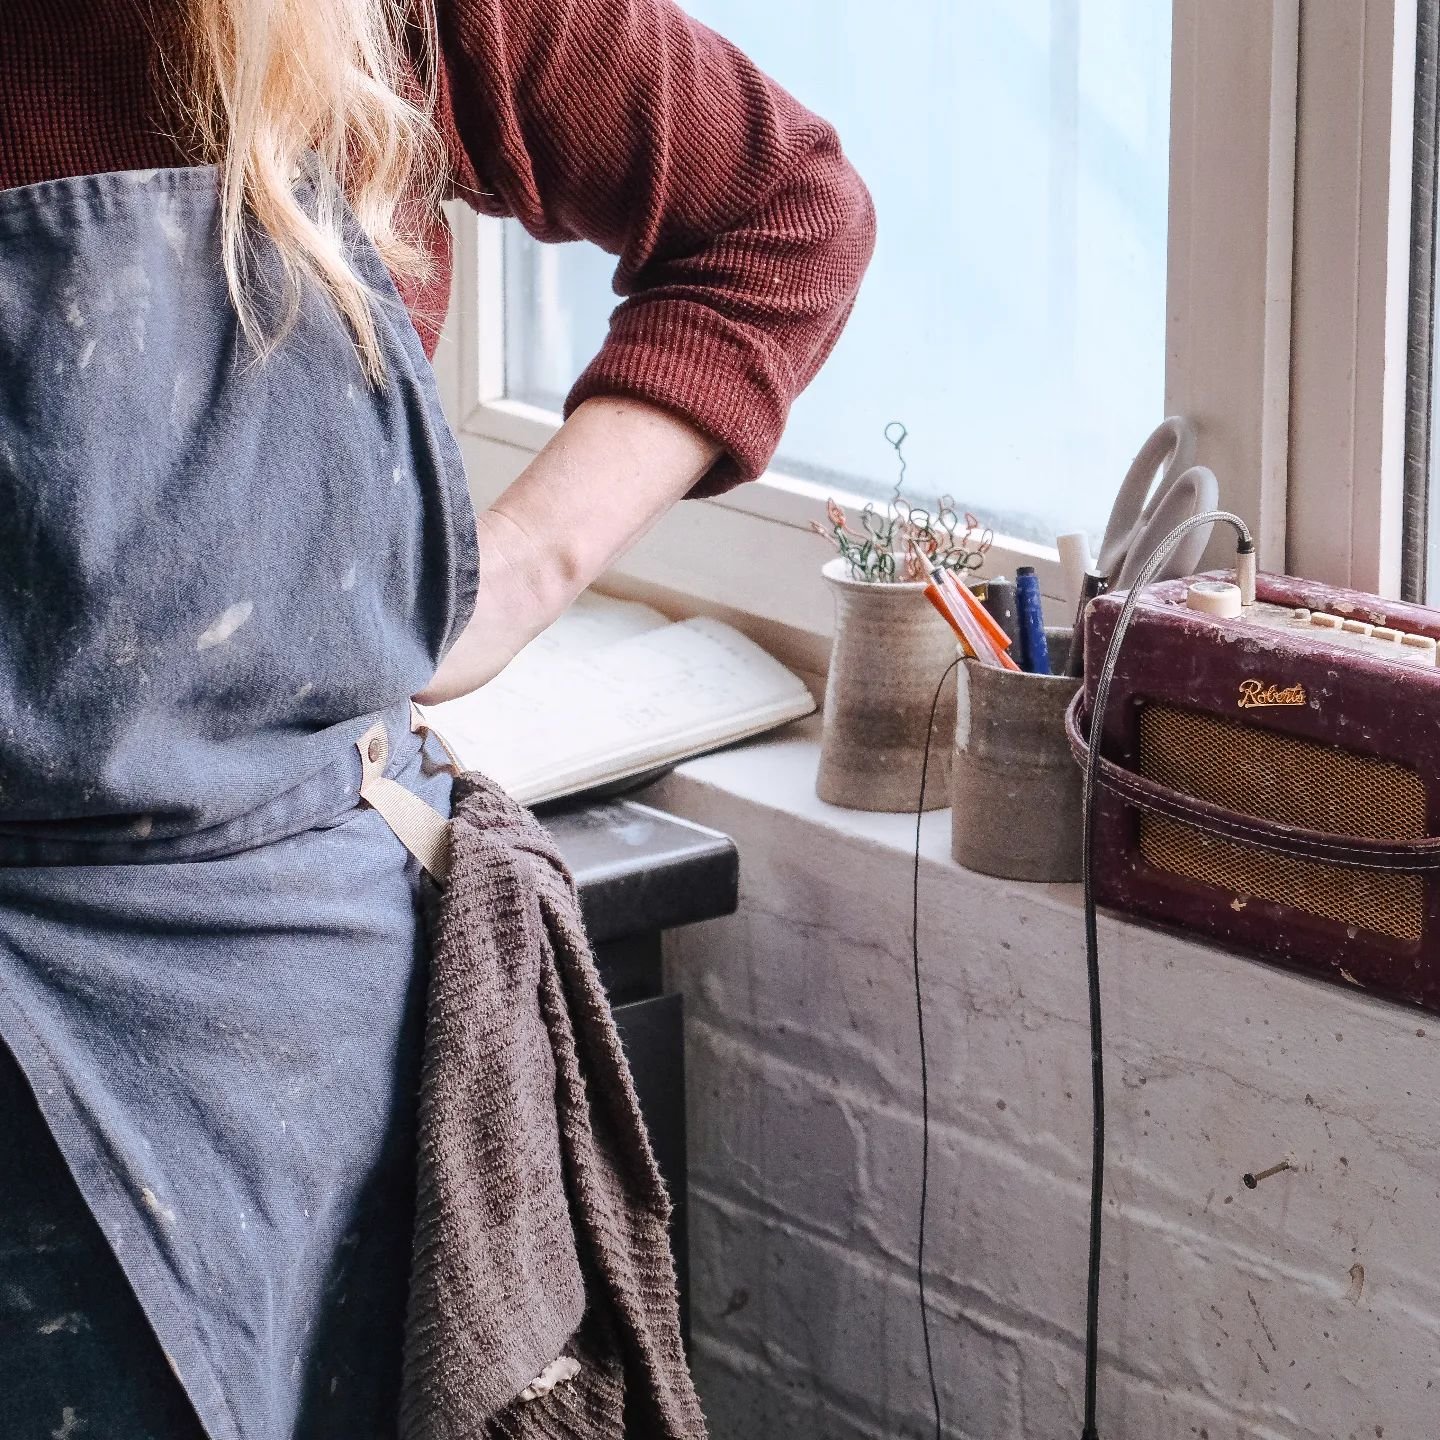 Been super busy working on some big commissions recently and have very much neglected social media! So here is a nice photo of my apron and trusty radio. 

Emma x

#macclesfield #pottery
#cheshire #clay 

Photo by @itscommonsenses